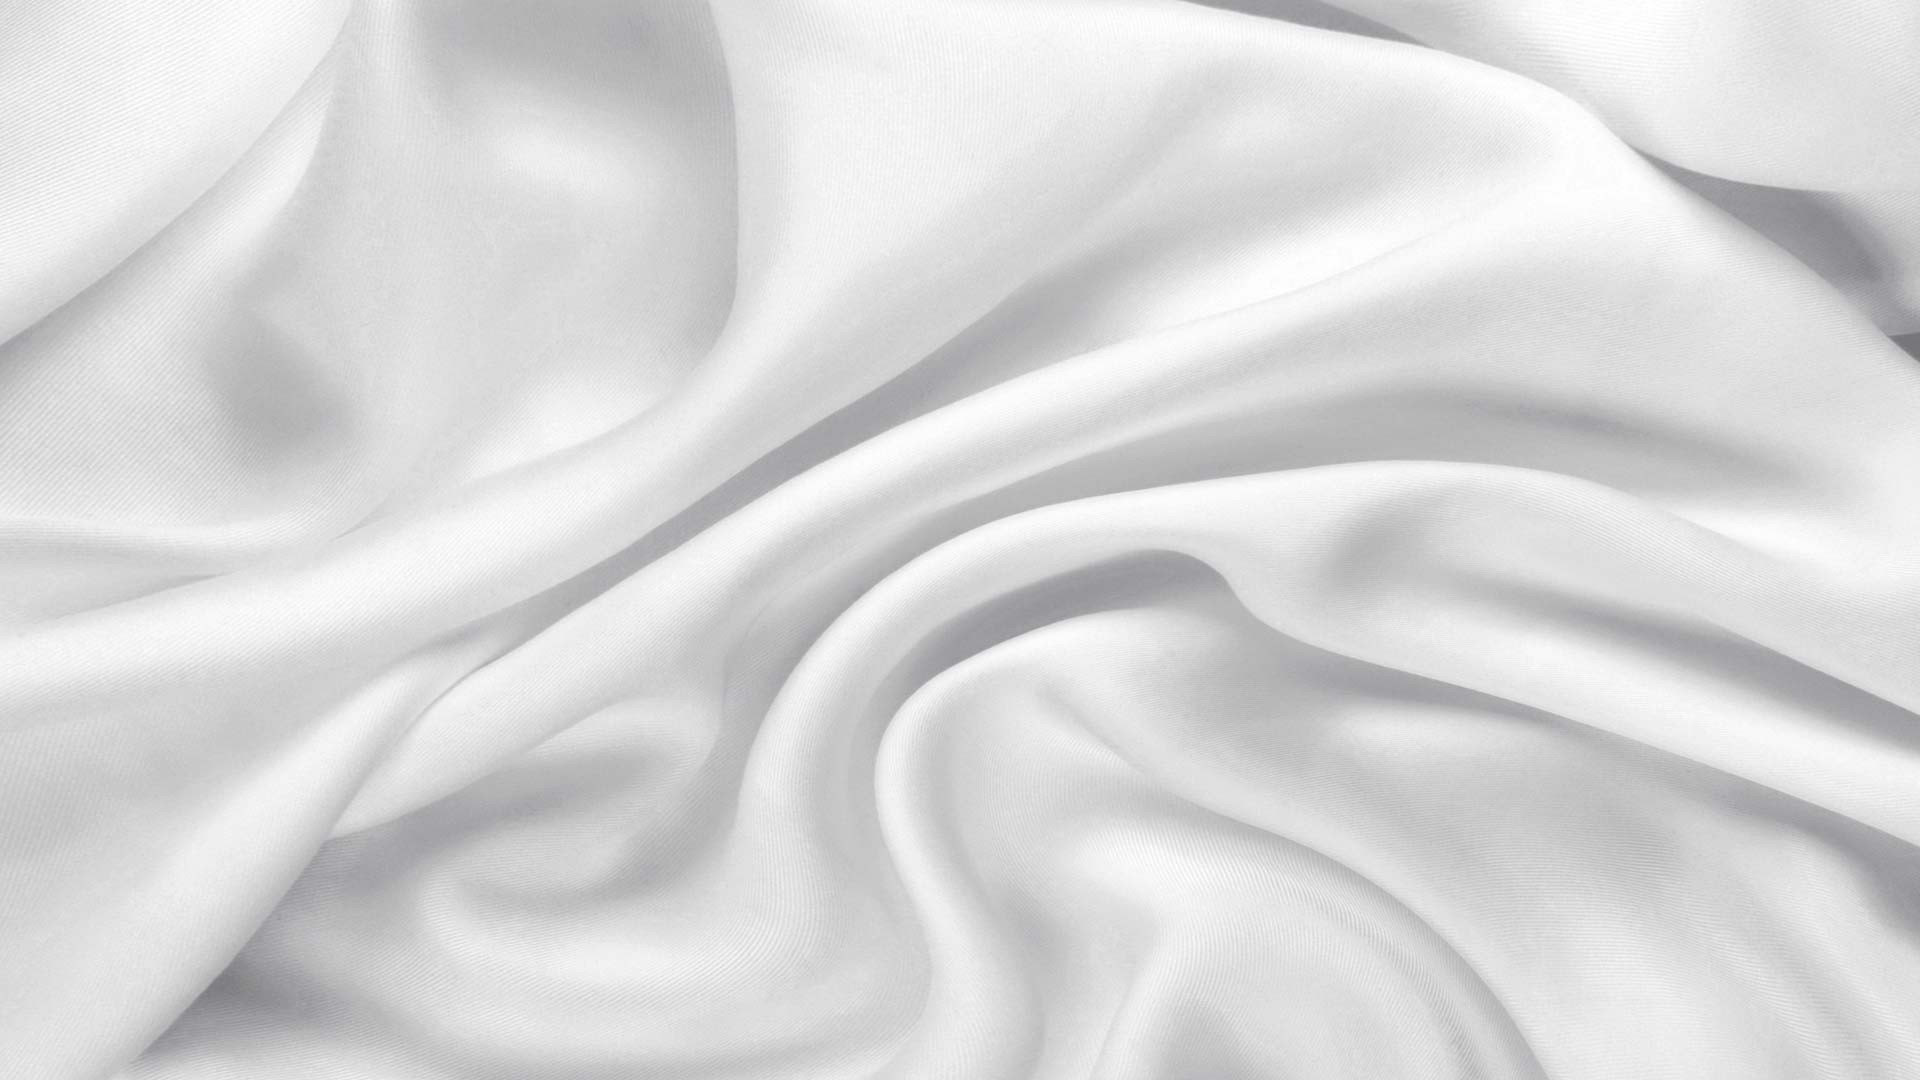 Desktop Wallpaper White Silk With high-resolution 1920X1080 pixel. You can use this wallpaper for your Windows and Mac OS computers as well as your Android and iPhone smartphones